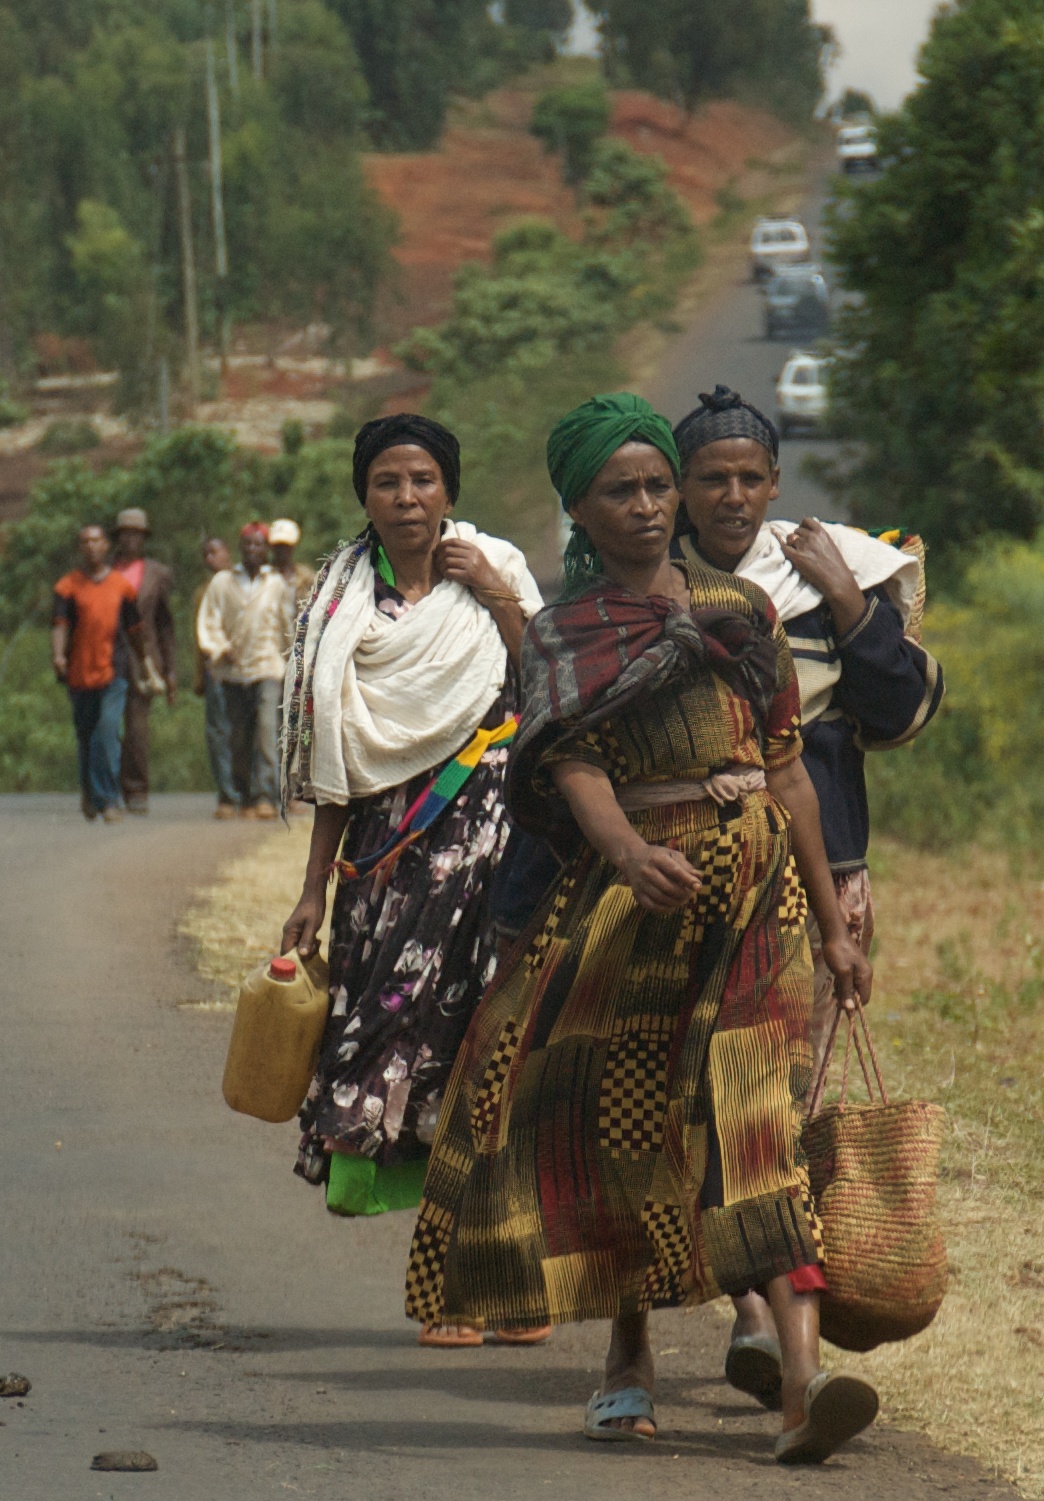 a group of women walking down the road together